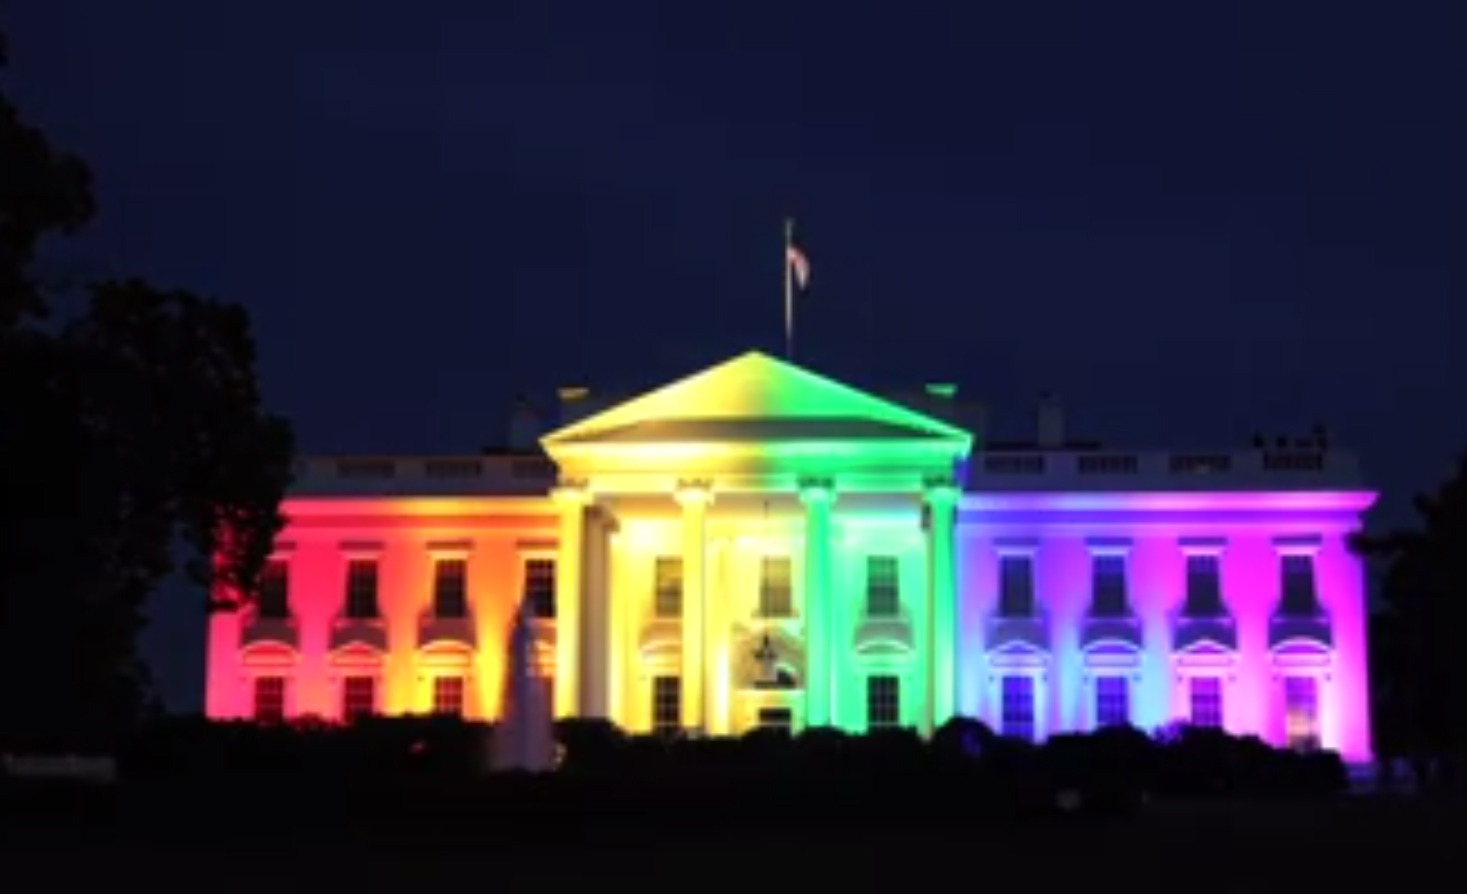 America allows same-sex marriages - white house is lit up